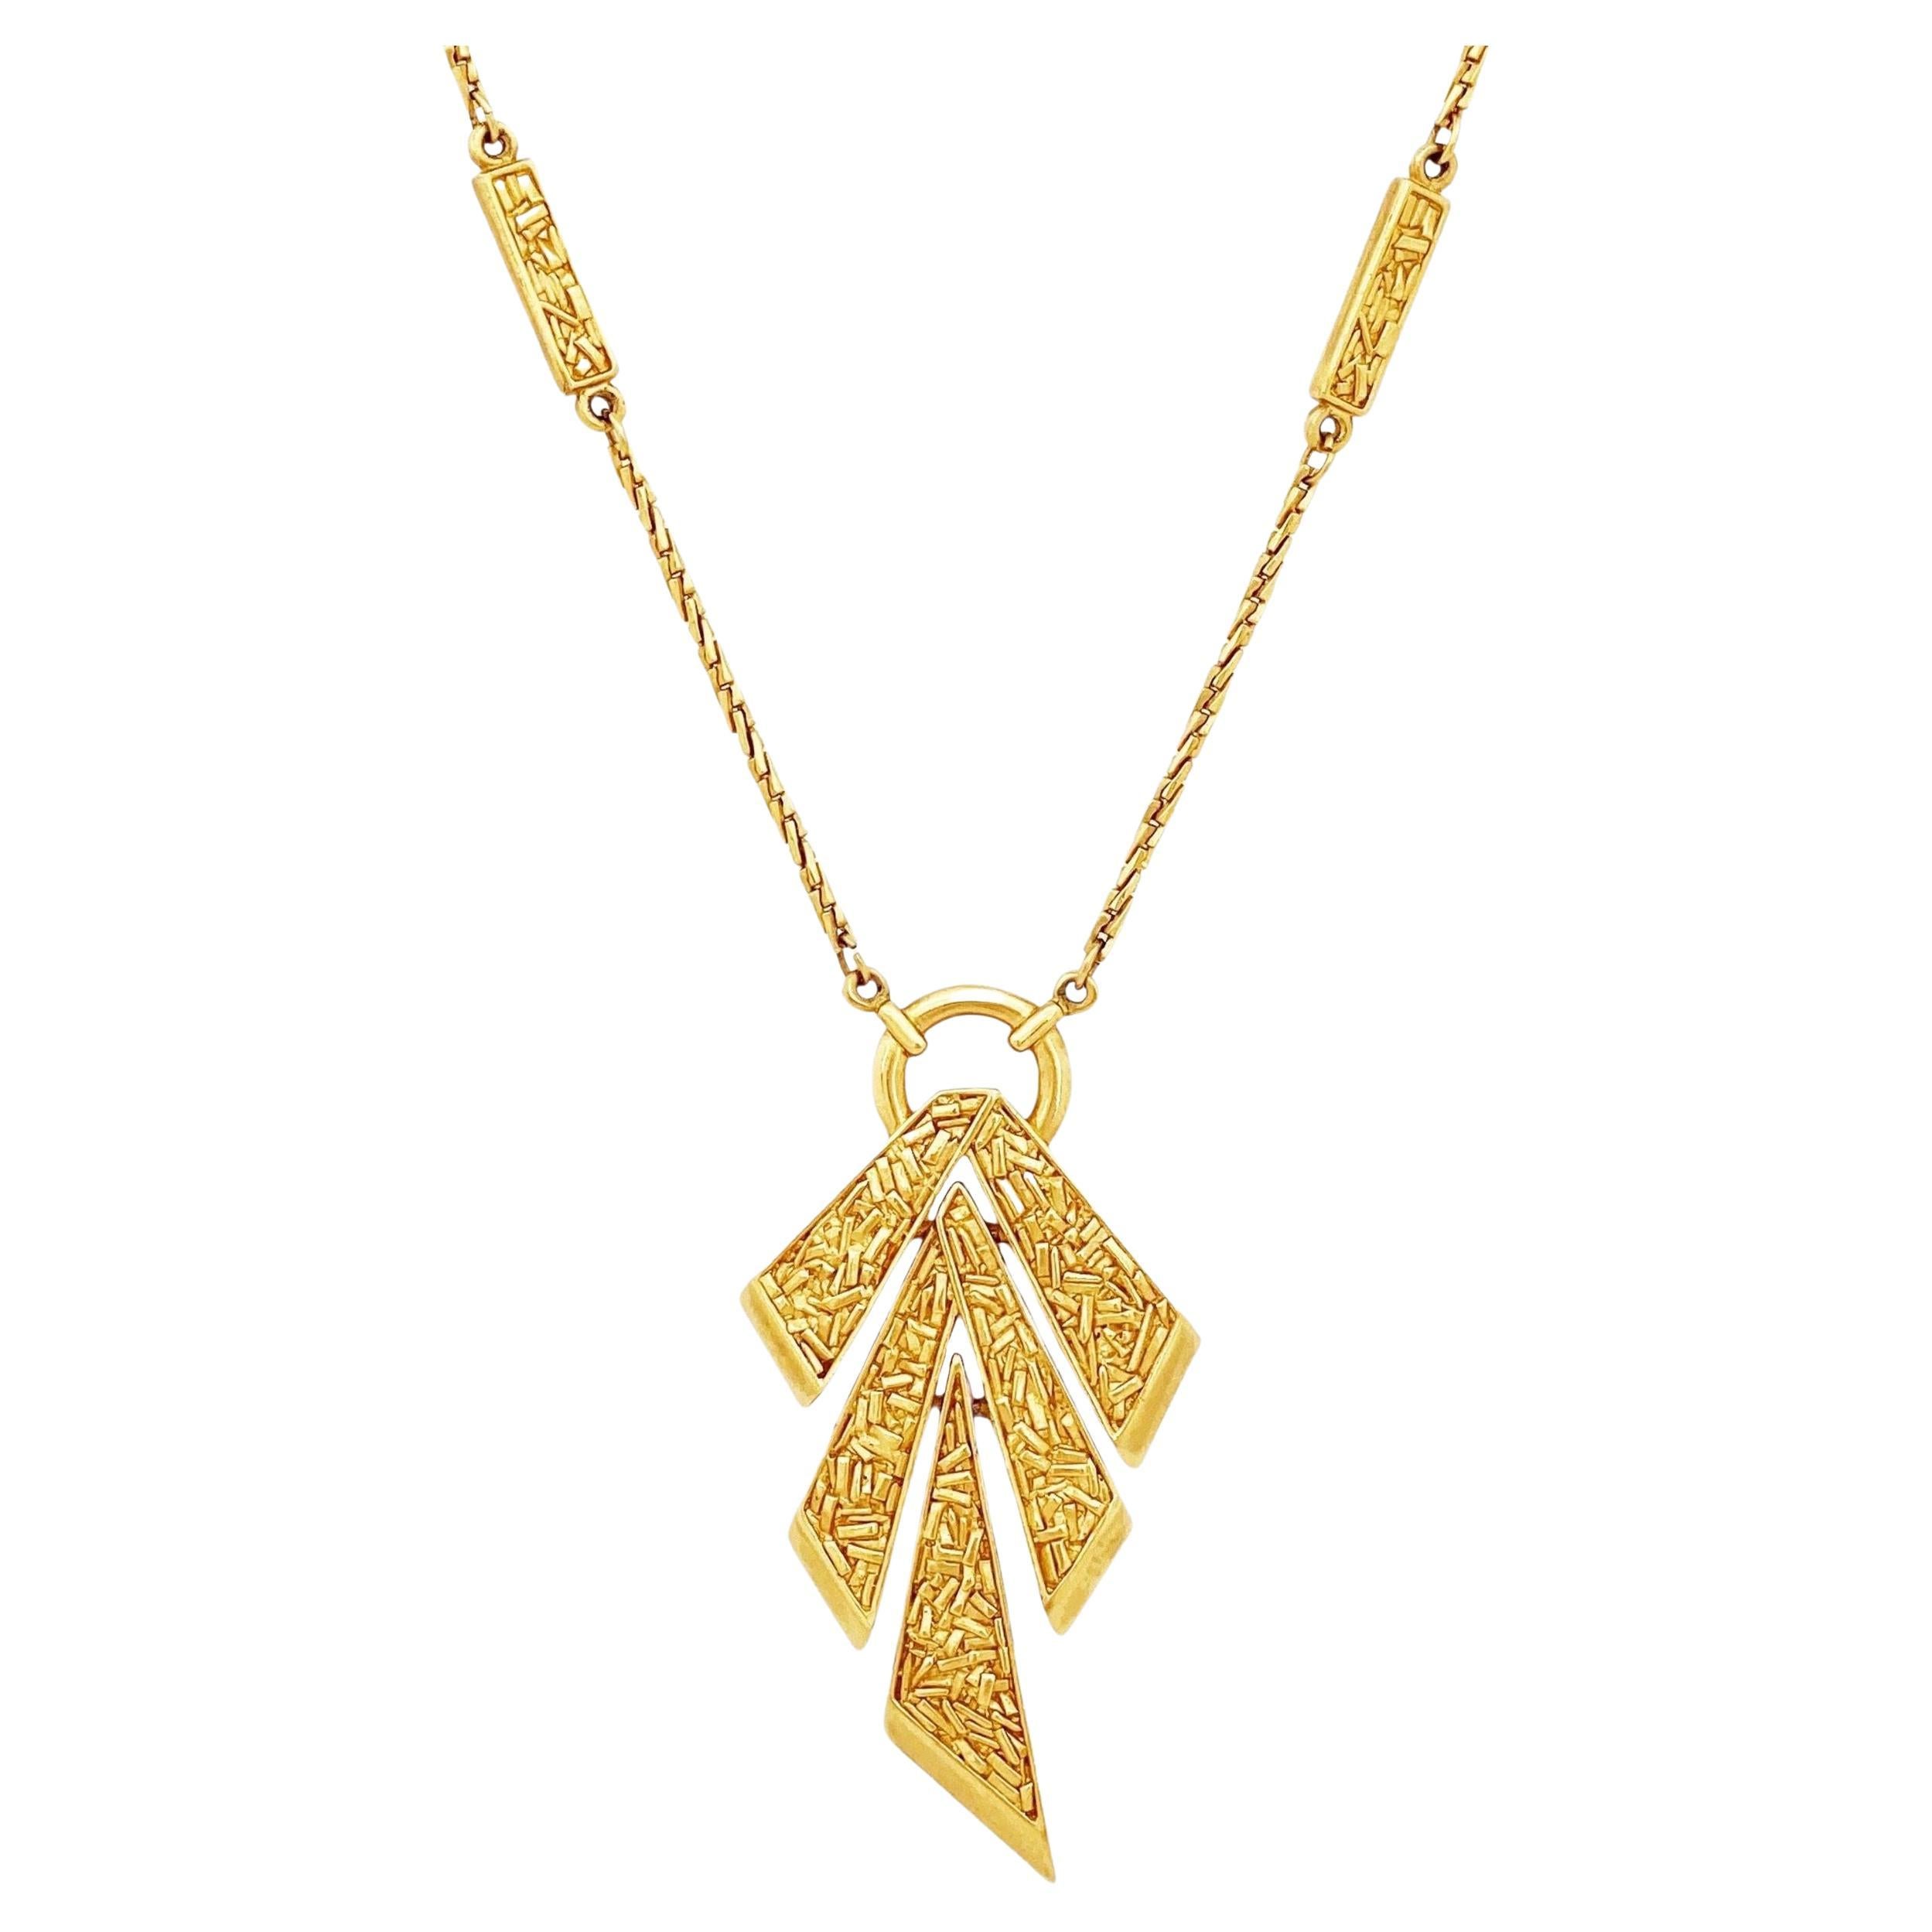 Brutalist Textured Gold Modernist Pendant Necklace By Crown Trifari, 1960s